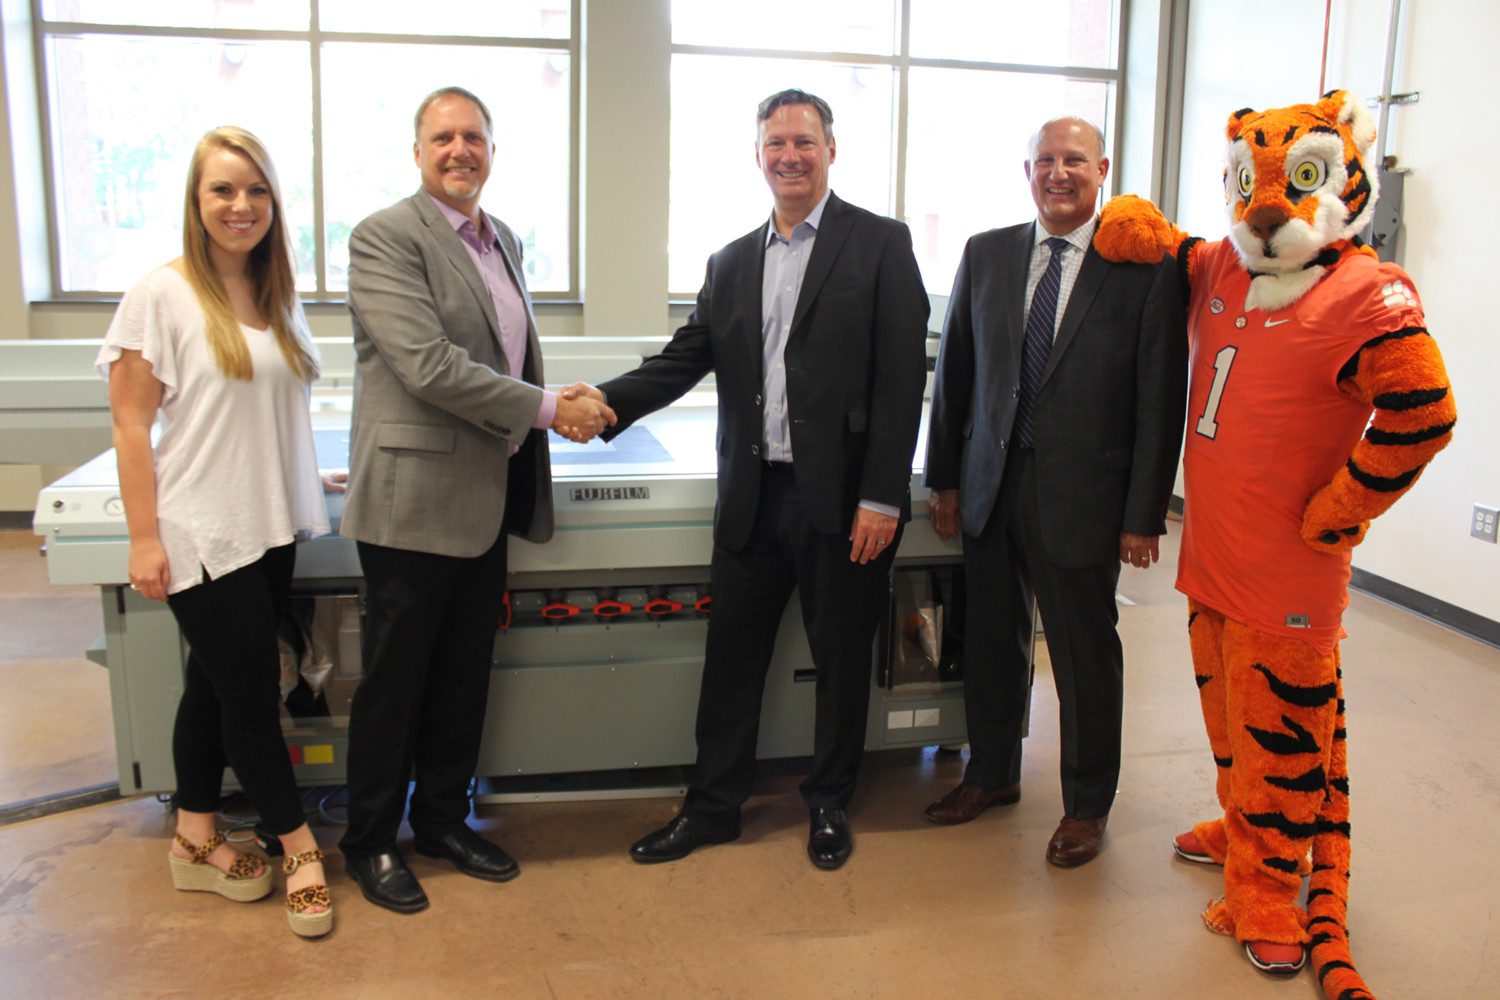 Clemson and Fuji employees pictured together in the Sonoco Institute Prototyping Lab